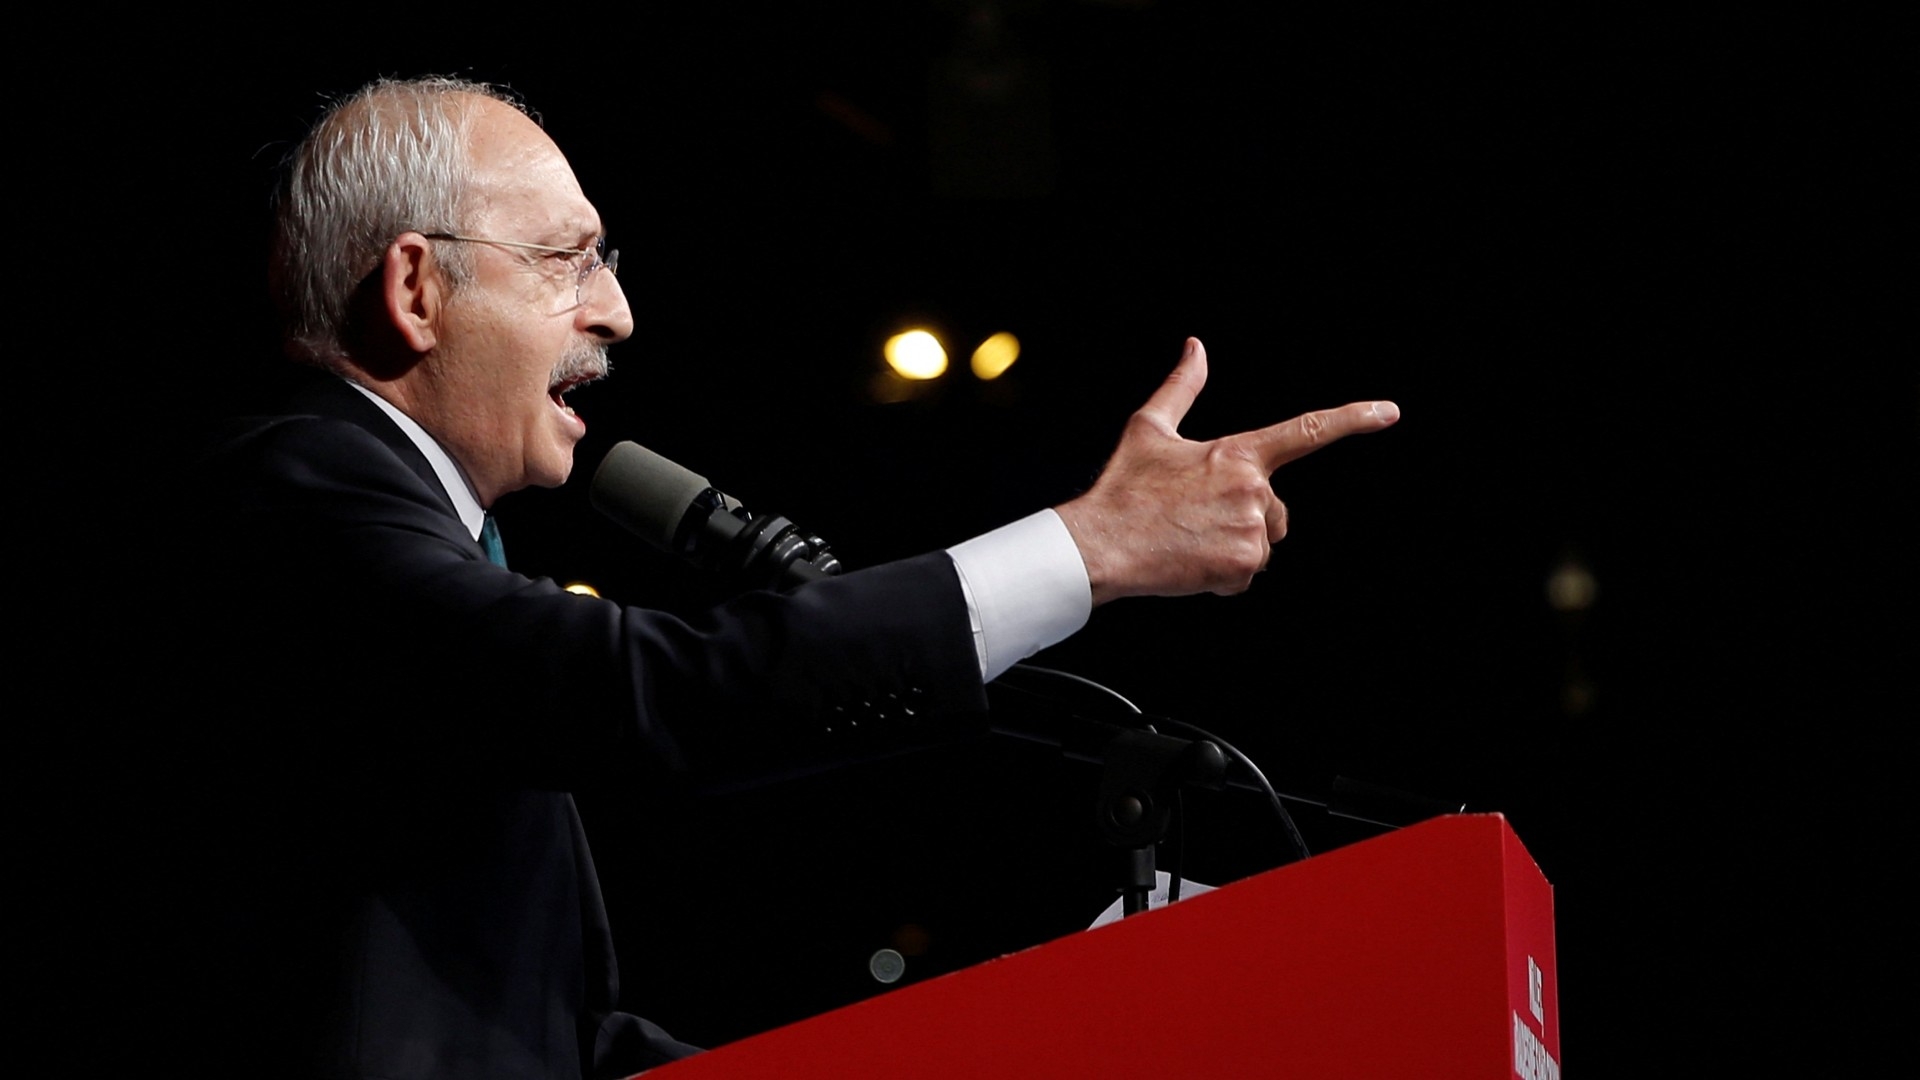 Kemal Kilicdaroglu, chairman of the Republican People's Party (CHP), speaks to a crowd (Reuters/file photo)